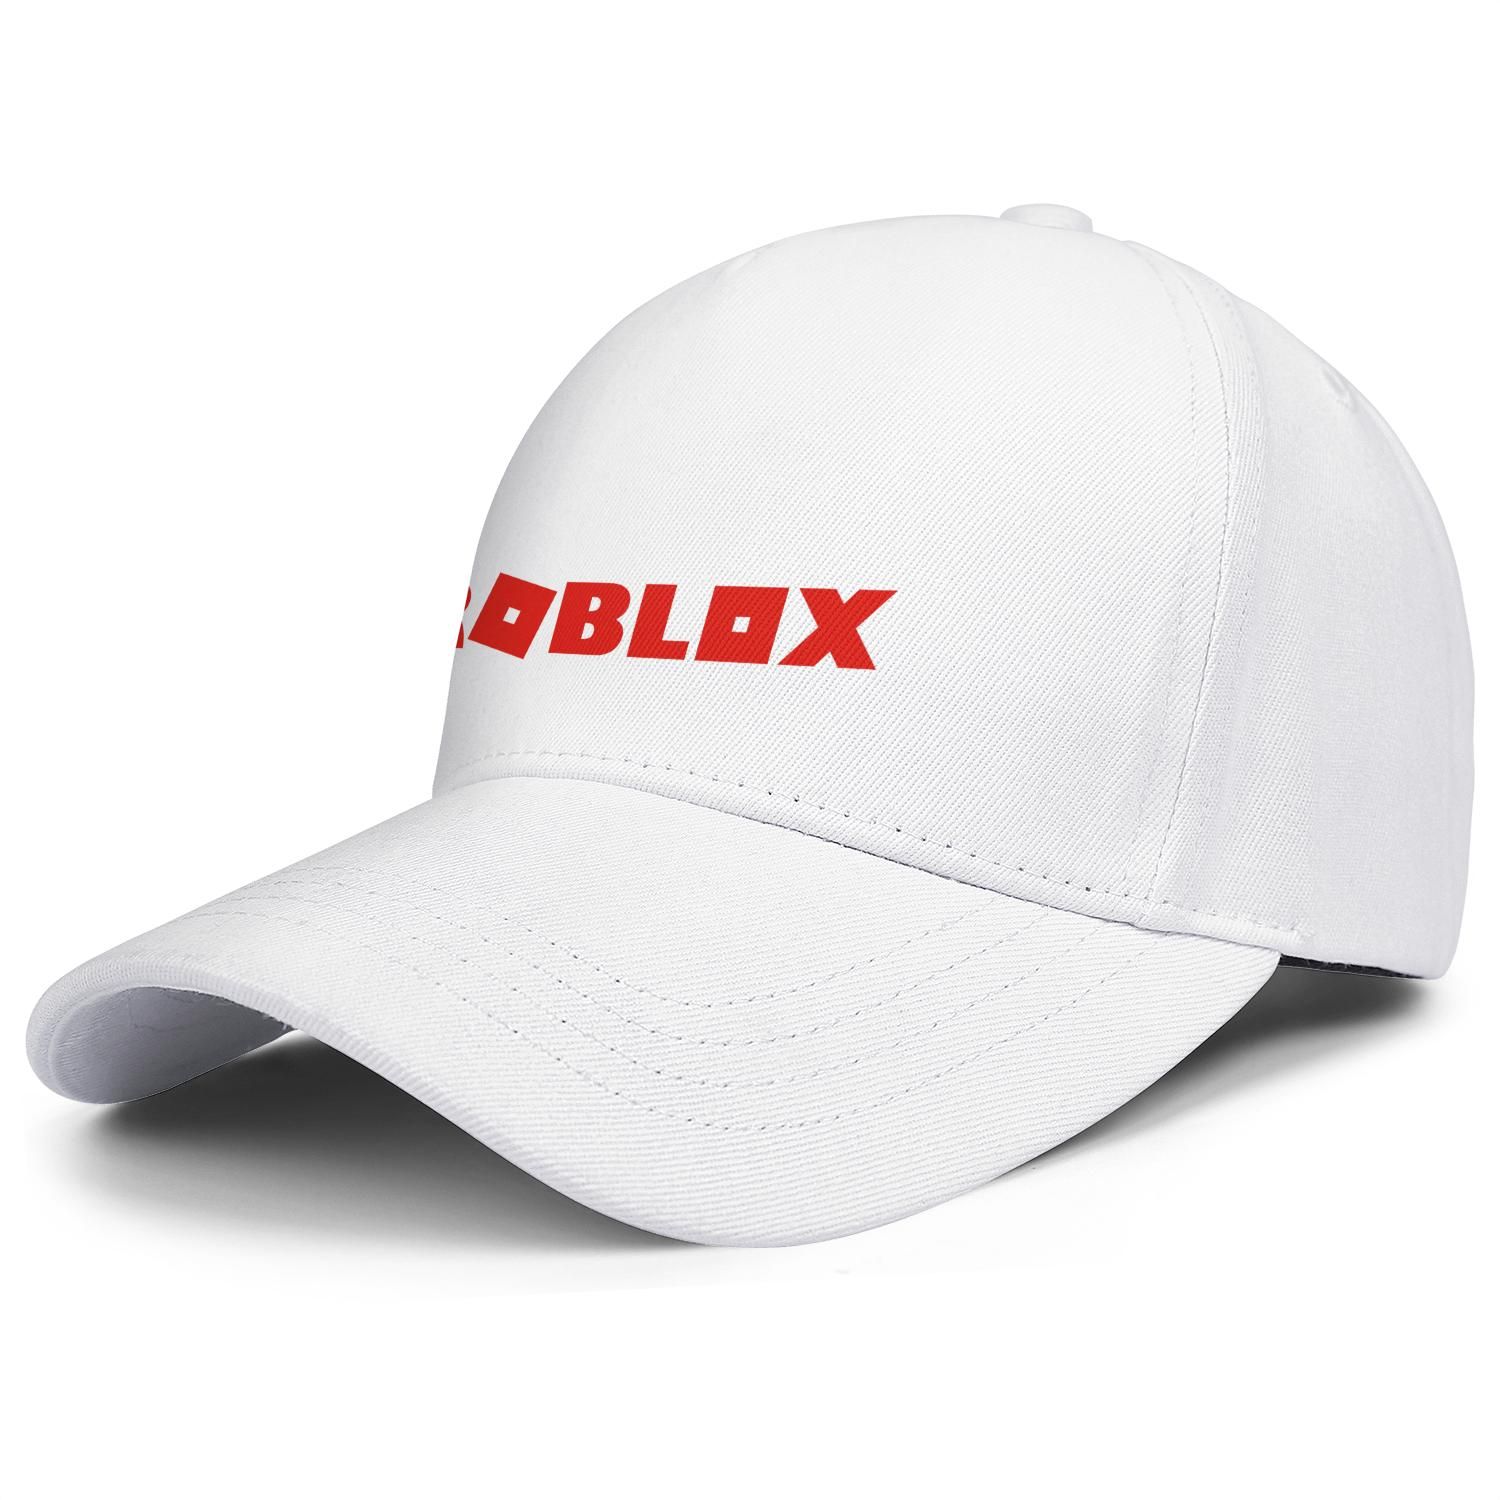 Roblox Logo Black Womens Mens Snapback Cap Adjustable Baseball Hat Customize Your Own Classic 100 Cotton Hats From Styleport 11 71 Dhgate Com - roblox black durag